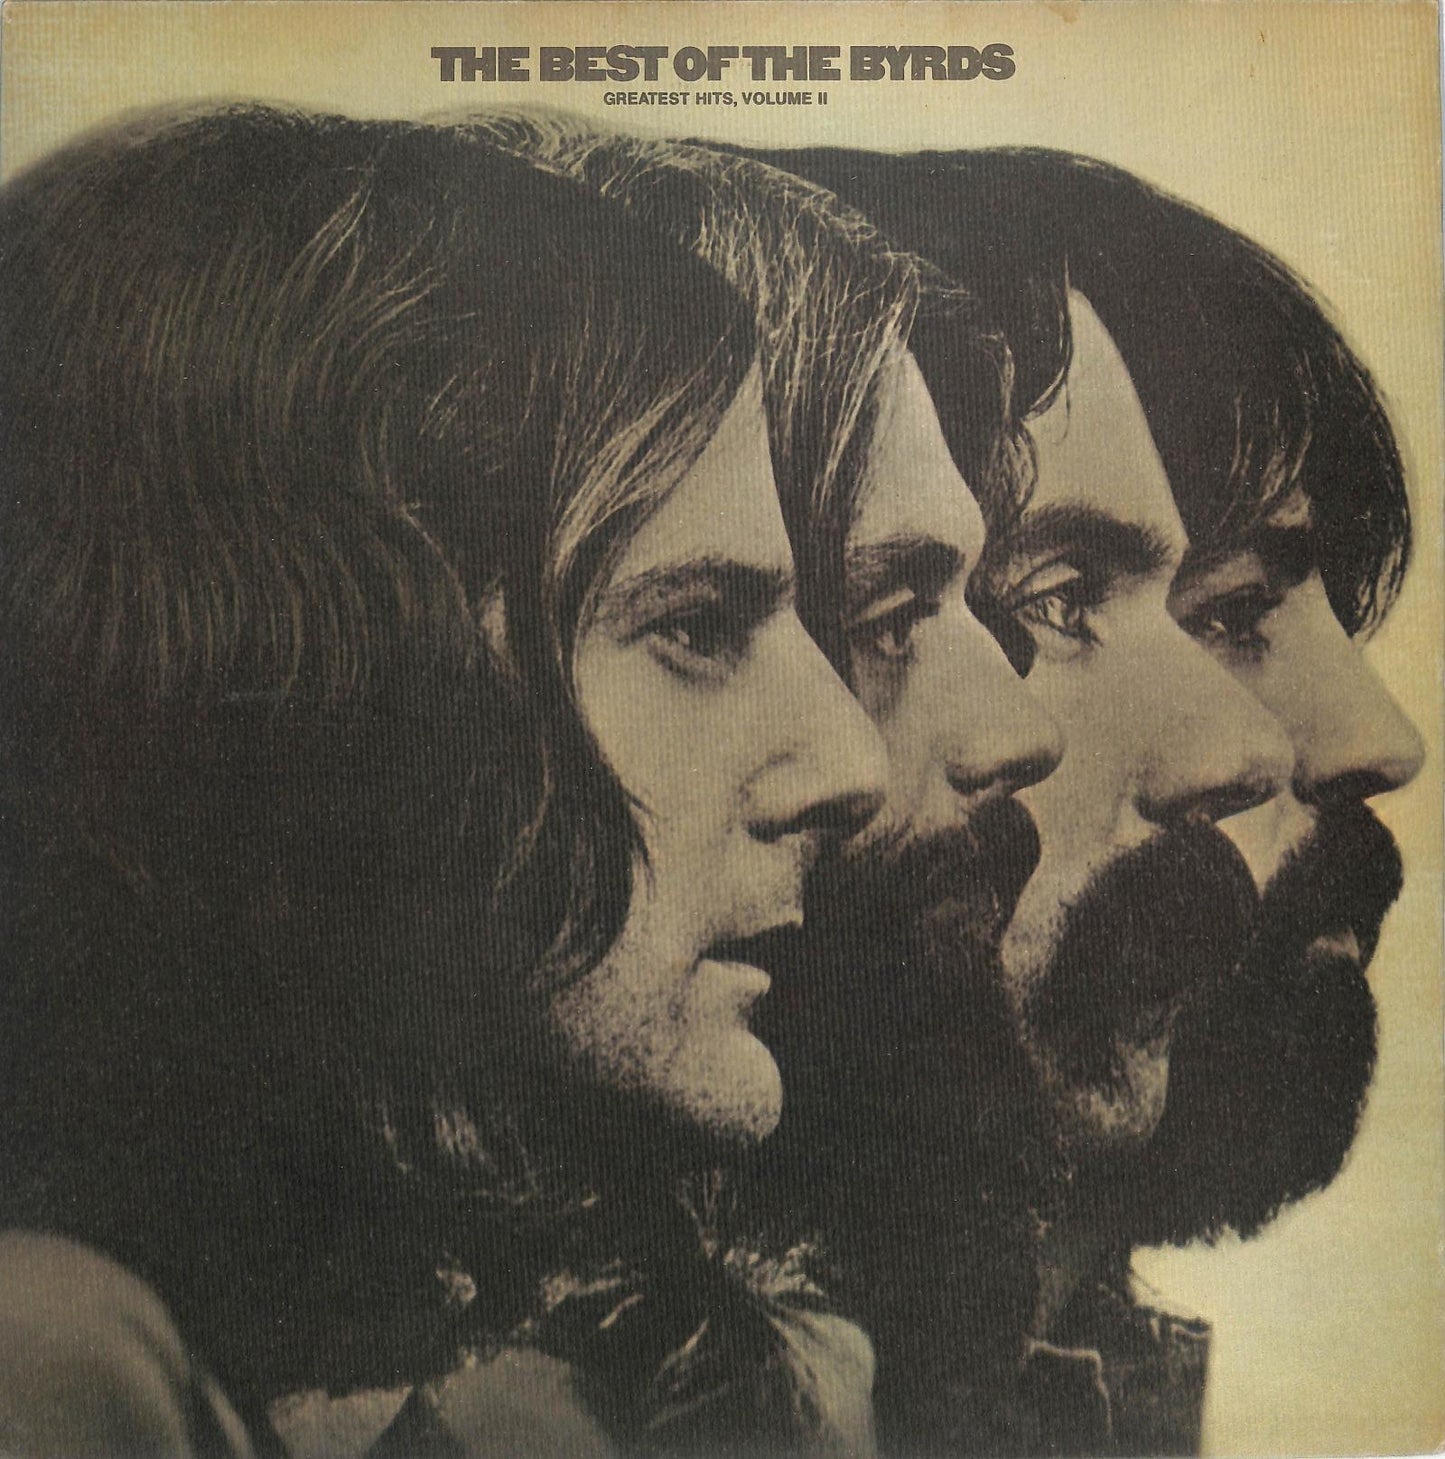 THE BYRDS - The Best Of The Byrds Greatest Hits, Volume II